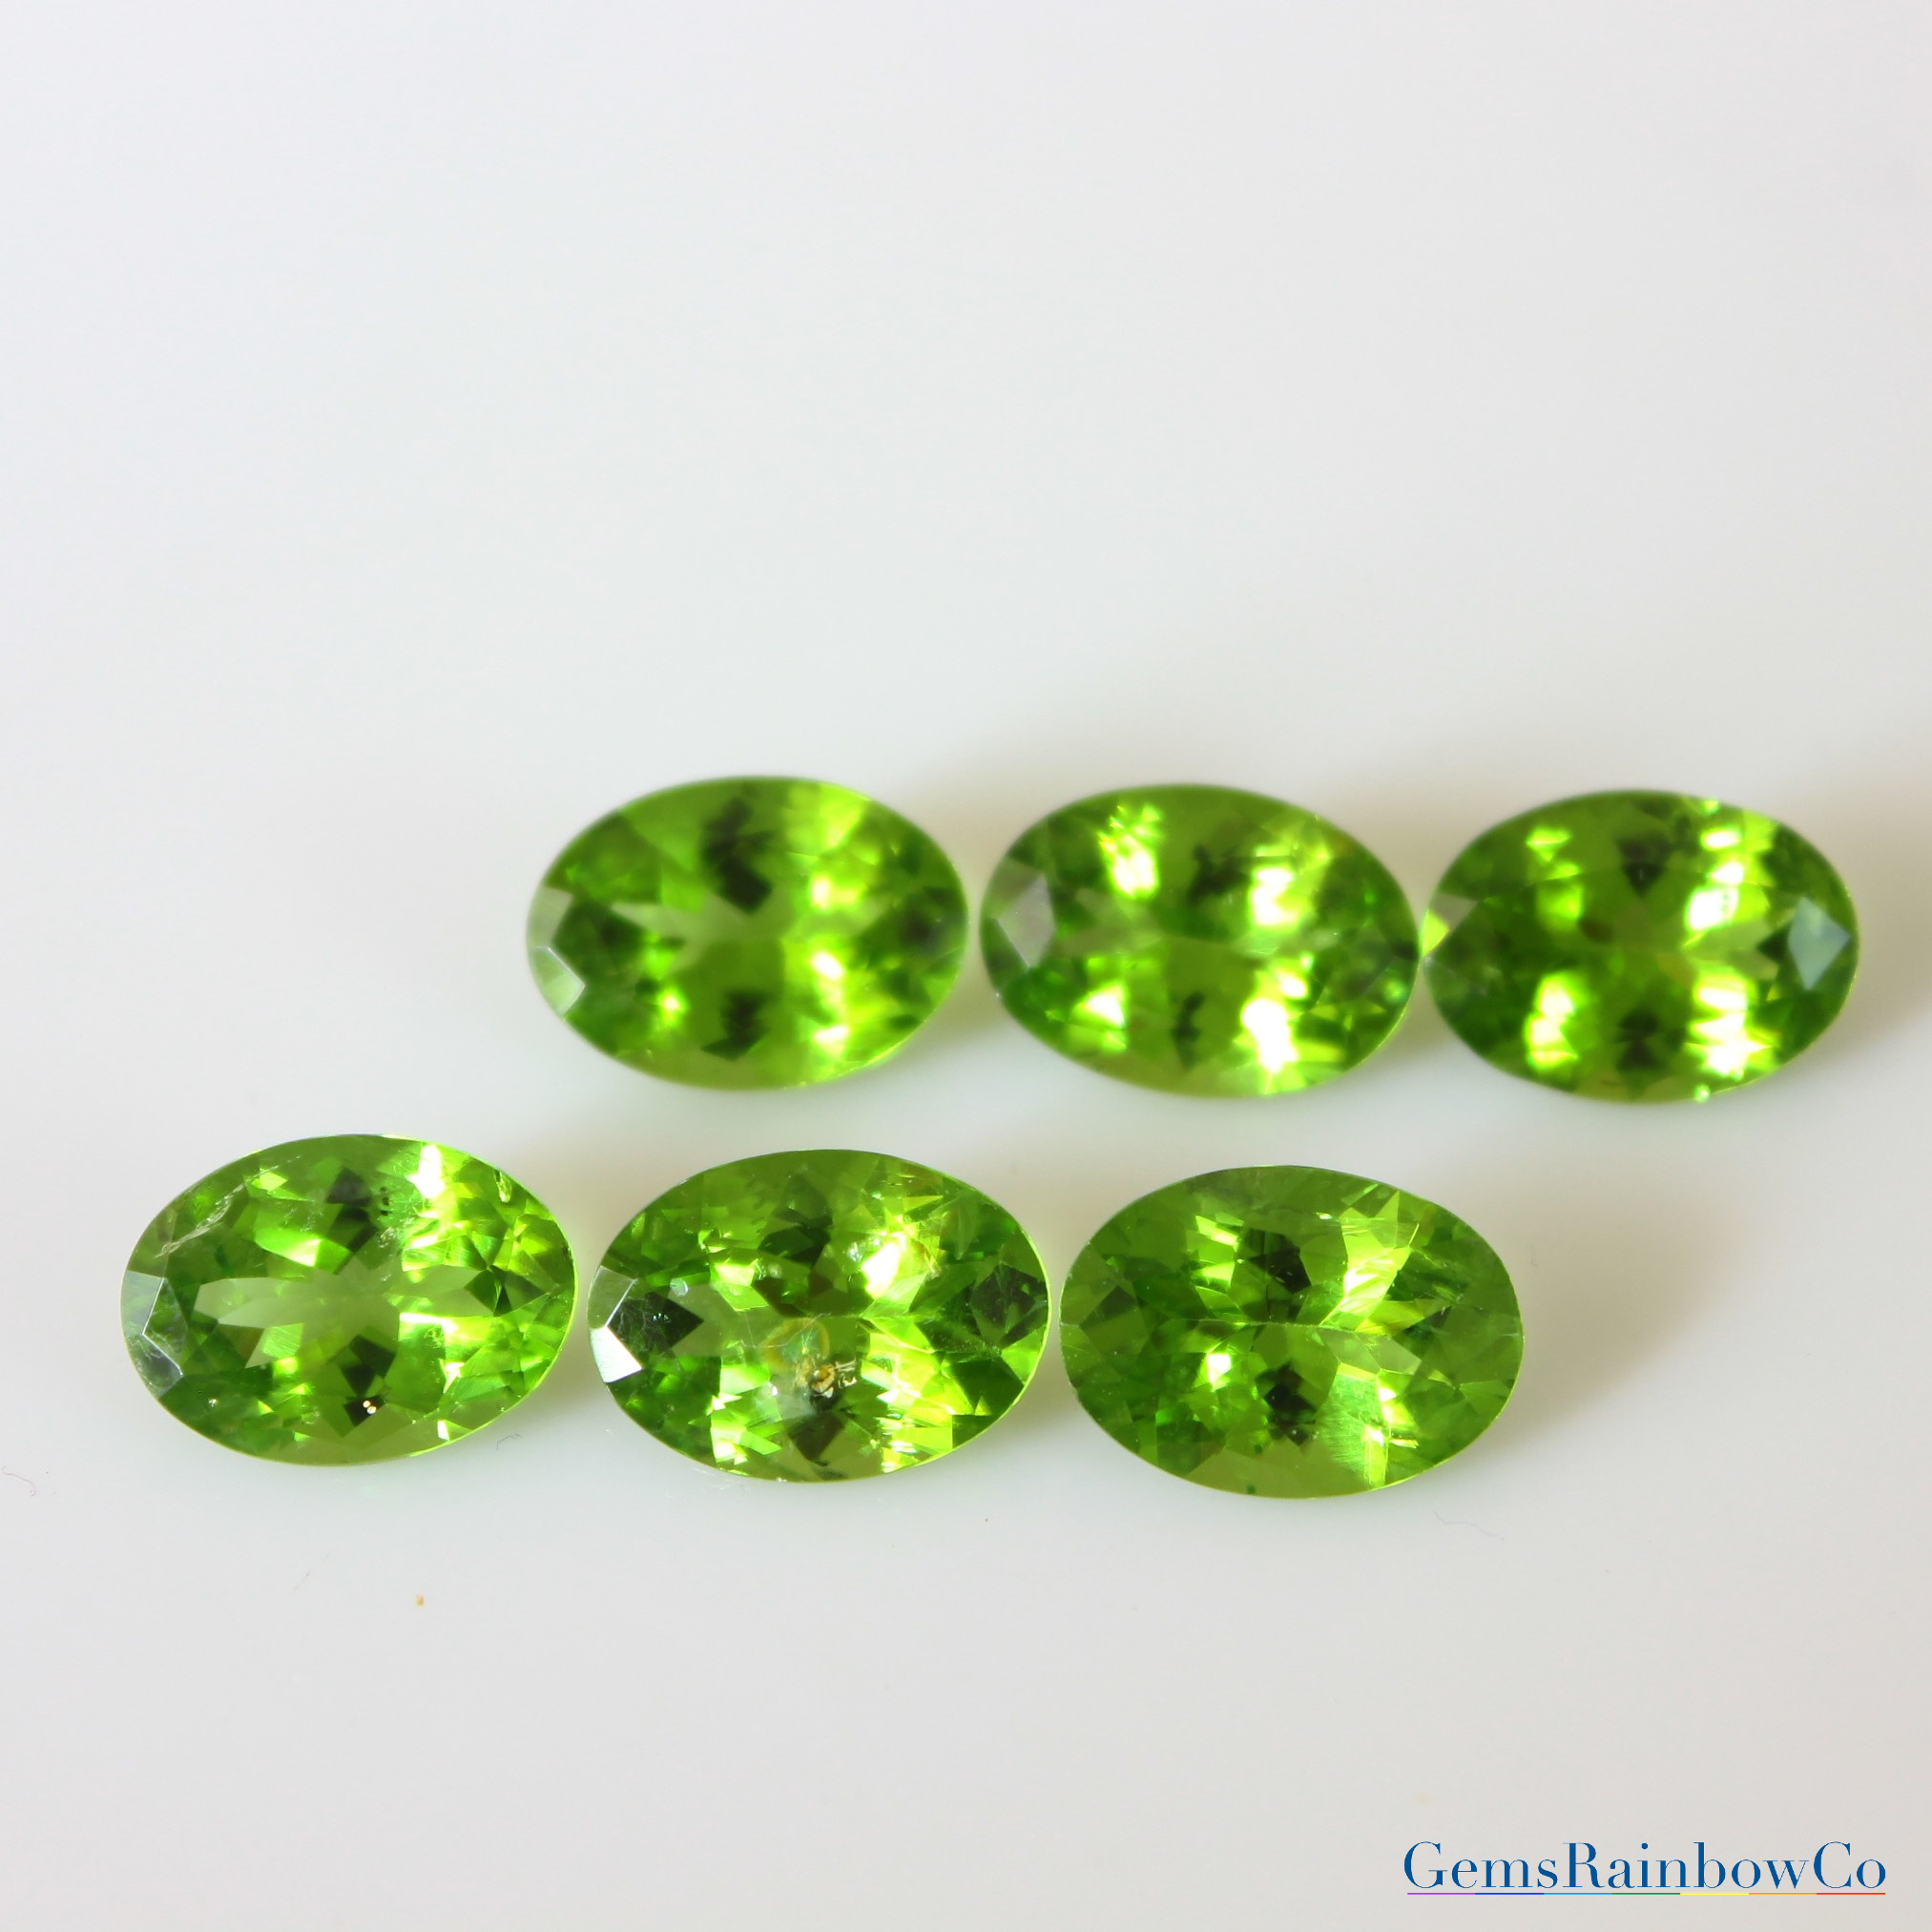 Details about   PERIDOT FACETED OVAL GEMSTONE SIZE 6 X 8 MM NATURAL LOOSE GEMSTONE FOR ONE PIECE 